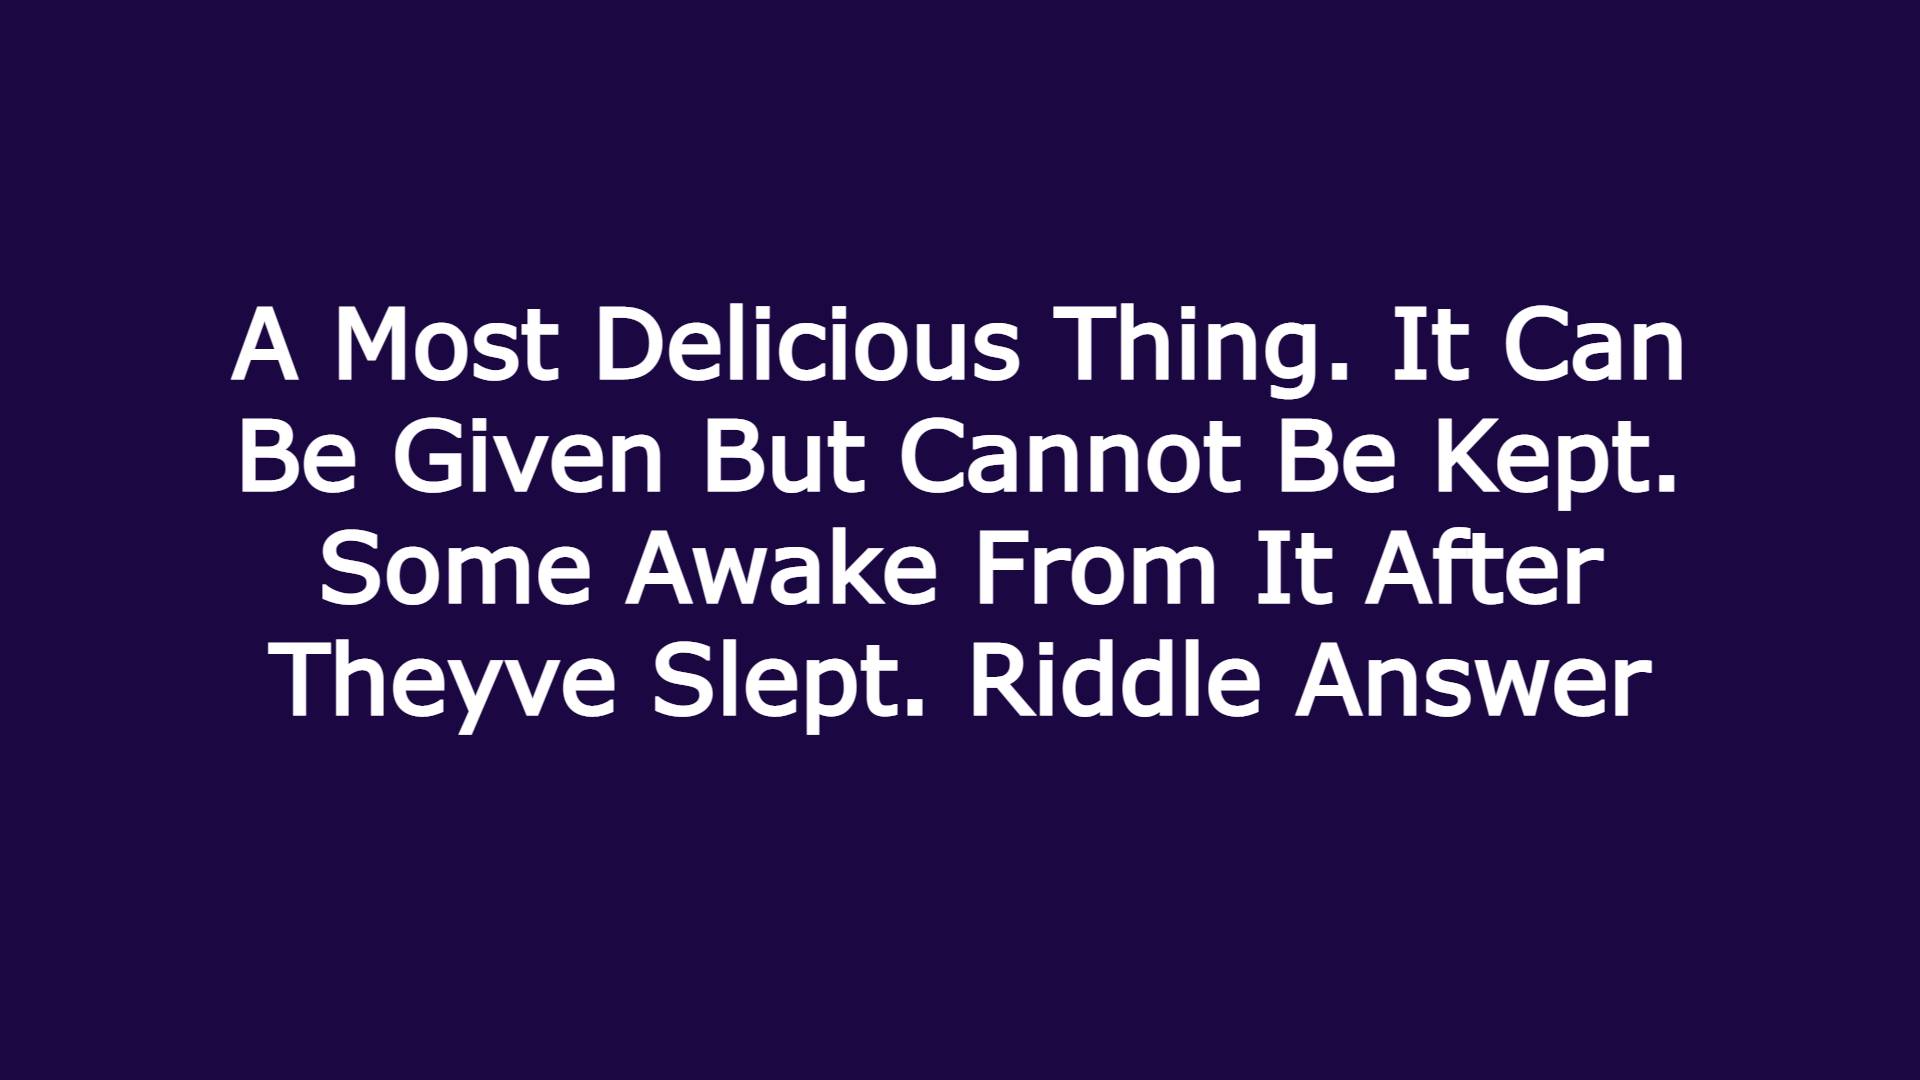 A Most Delicious Thing. It Can Be Given But Cannot Be Kept. Some Awake From It After Theyve Slept. Riddle Answer